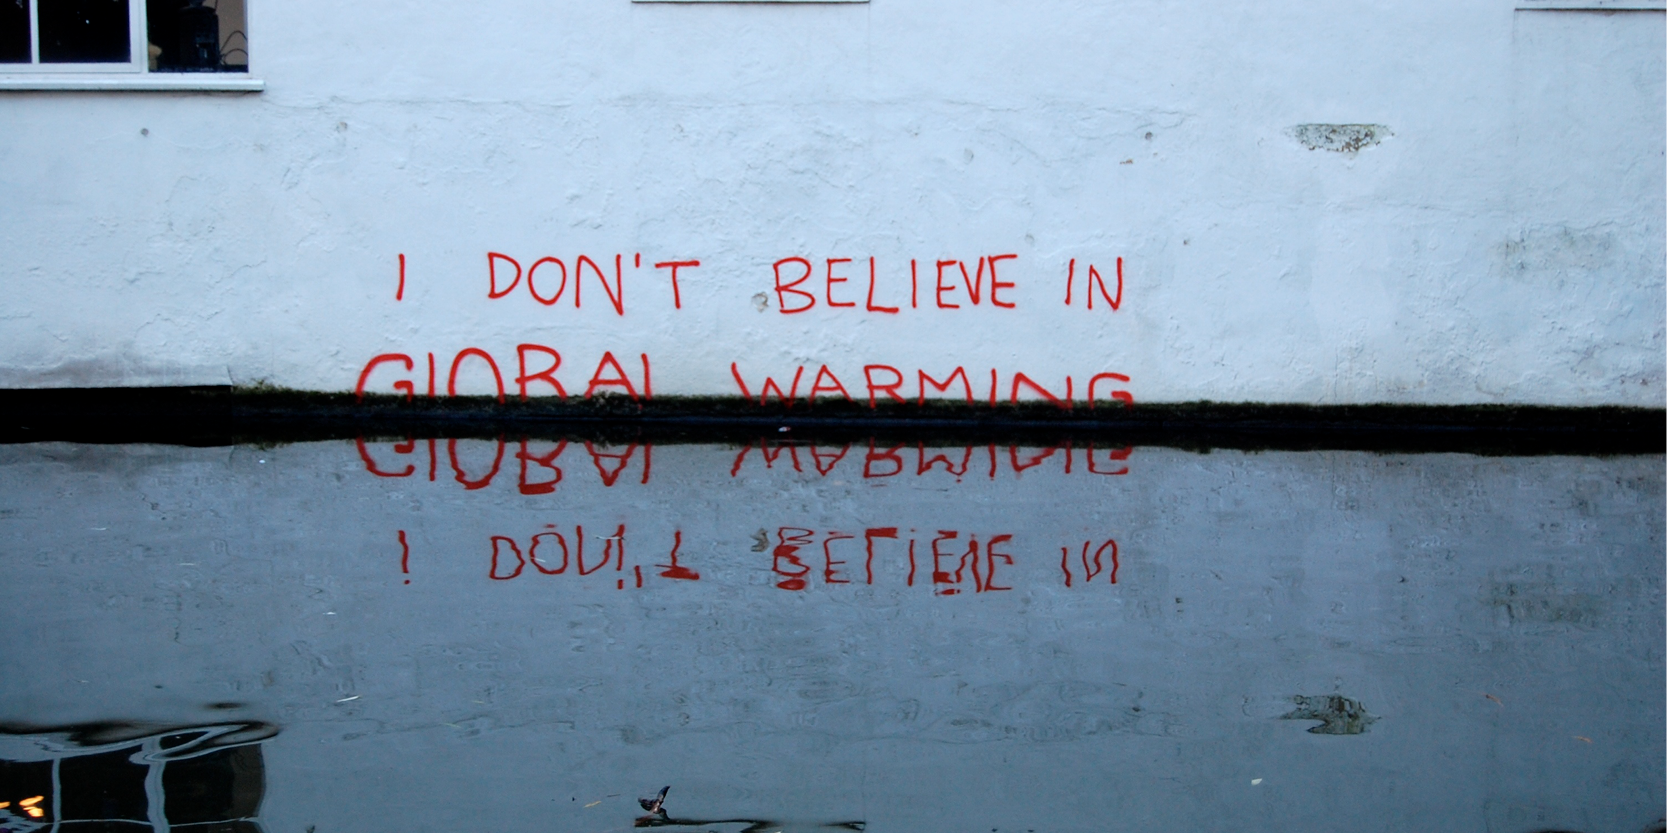 "I don't believe in Global Warming" written in spray paint reflected in flooded groundwater